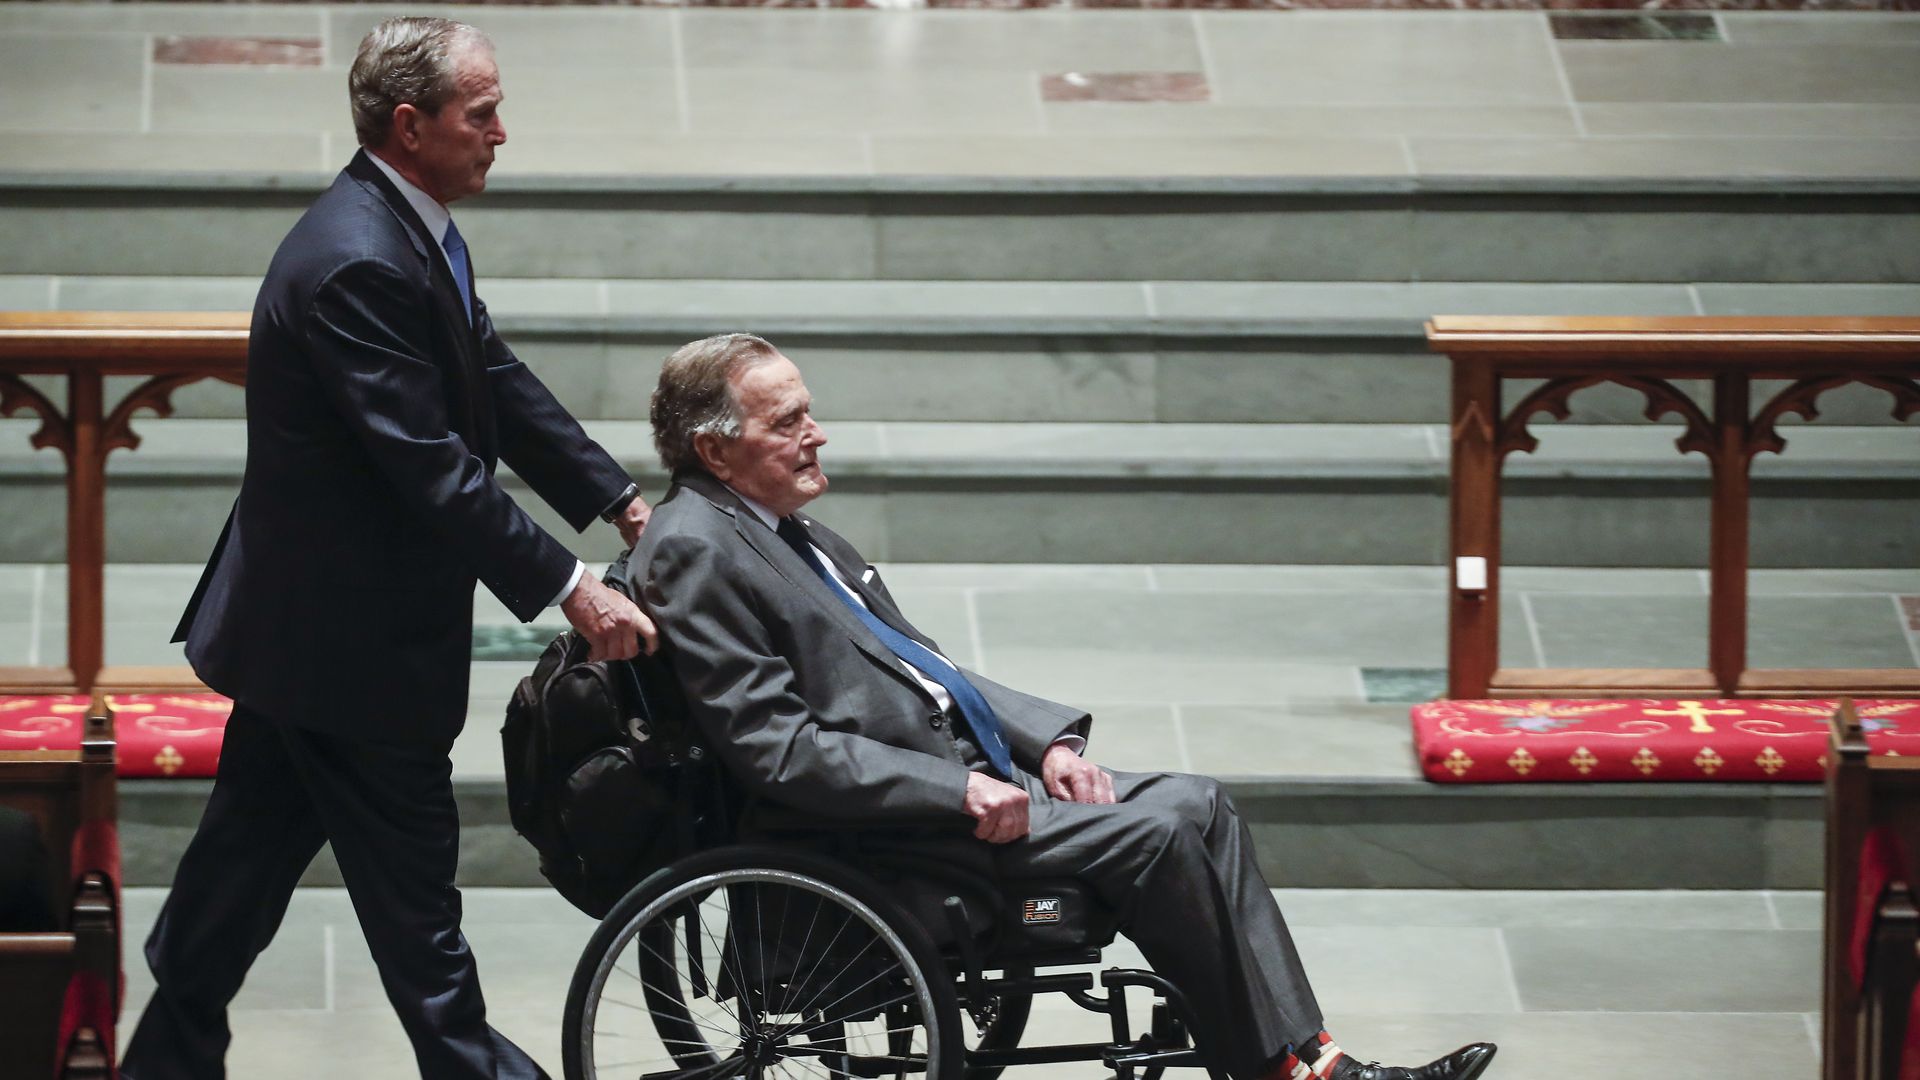 Former president George W. Bush pushes his father, George H.W. Bush, in a wheelchair at Barbara Bush's funeral